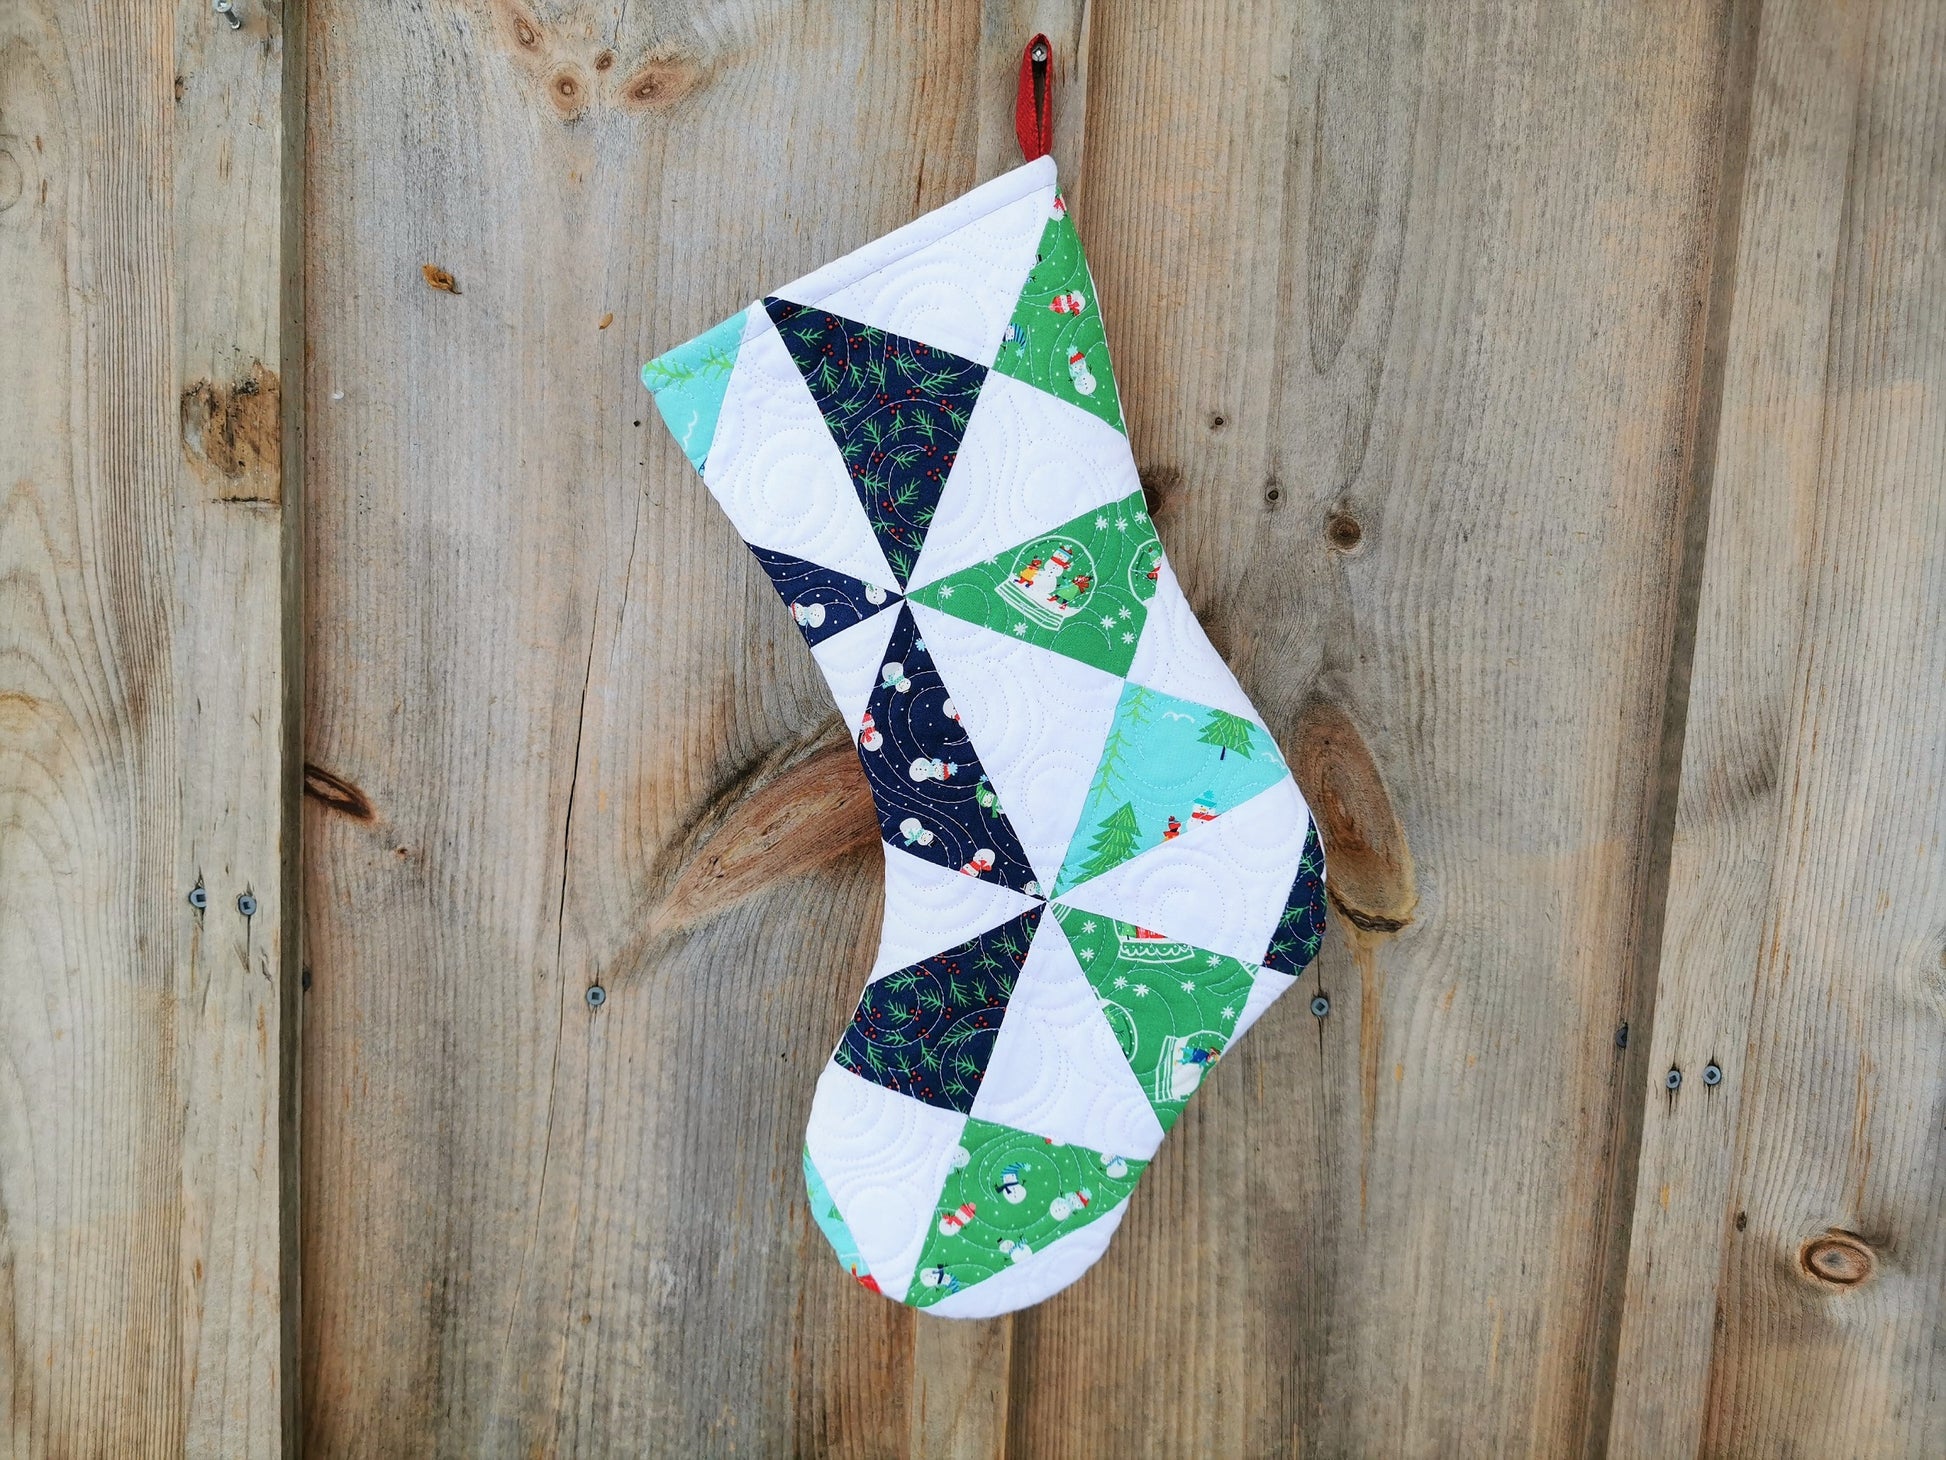 This heirloom quilted stocking has pinwheel piecing in winter themed fabrics on a white background.  Pinwheels are navy, green and a light teal blue. 